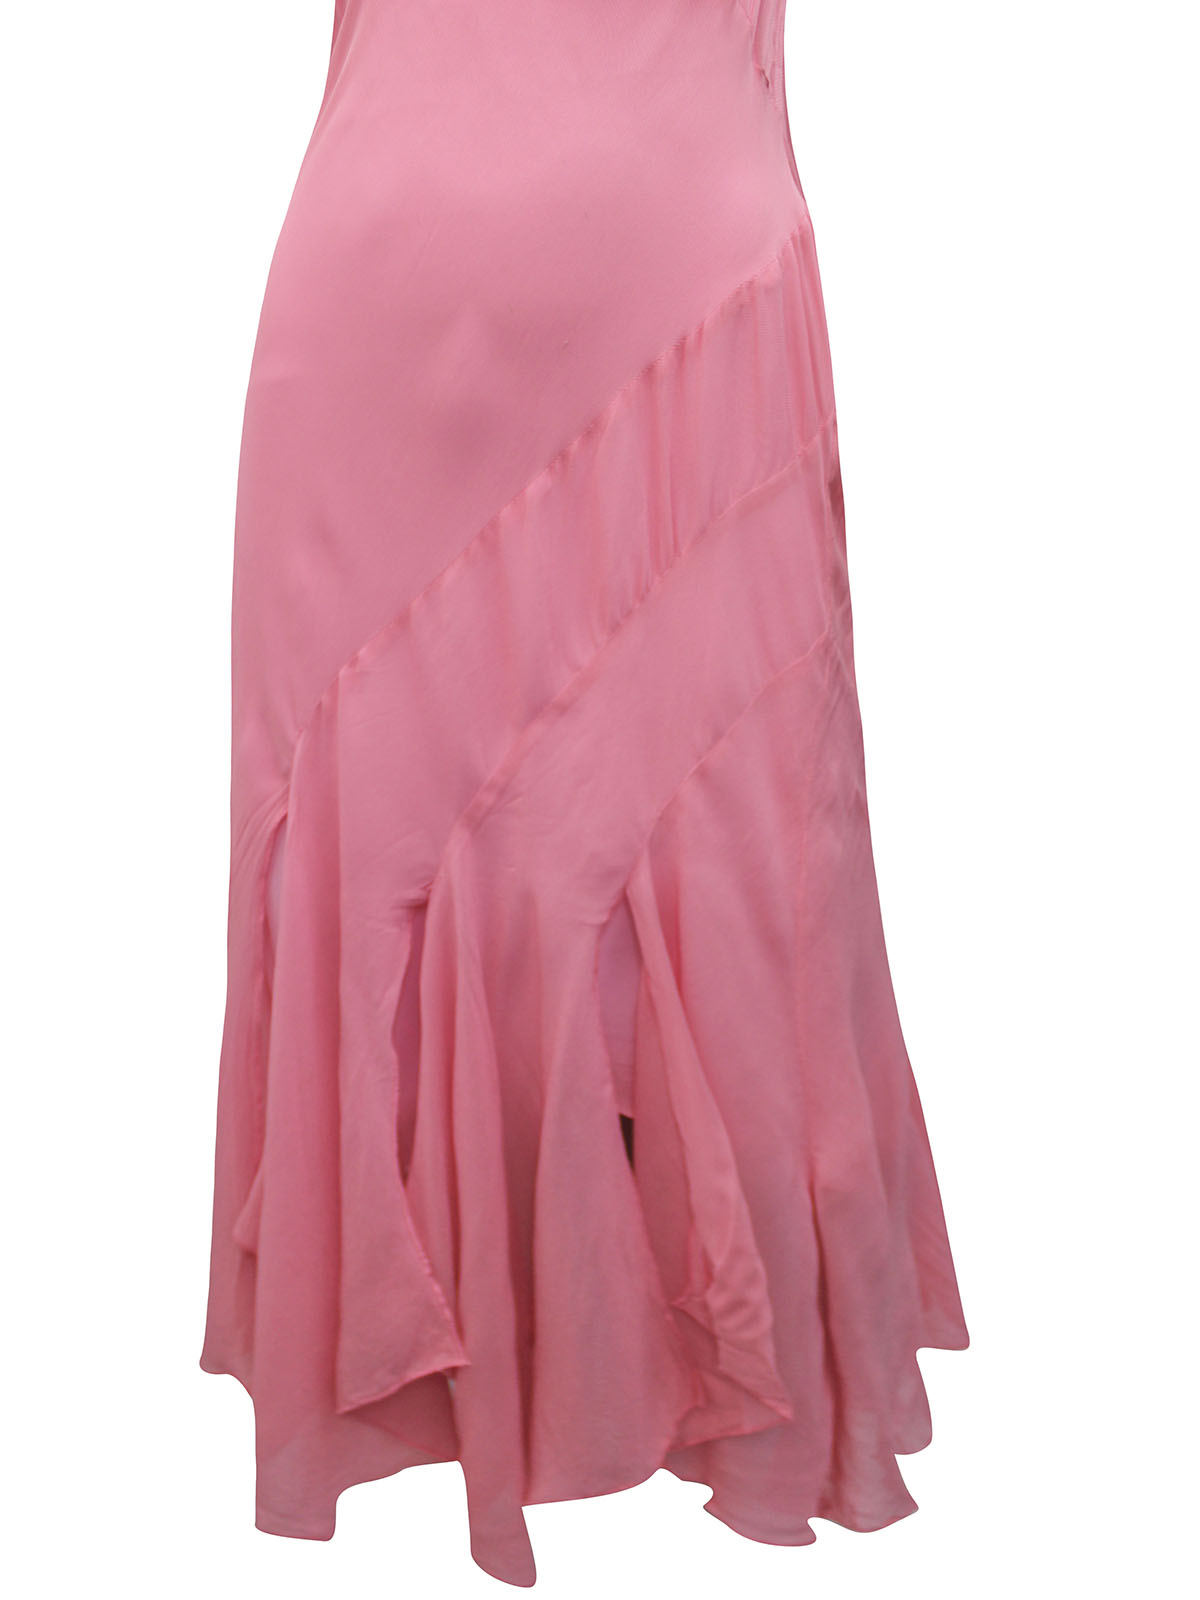 Together PINK Sleeveless Asymmetric Ruffle Dress - Size 4 to 18